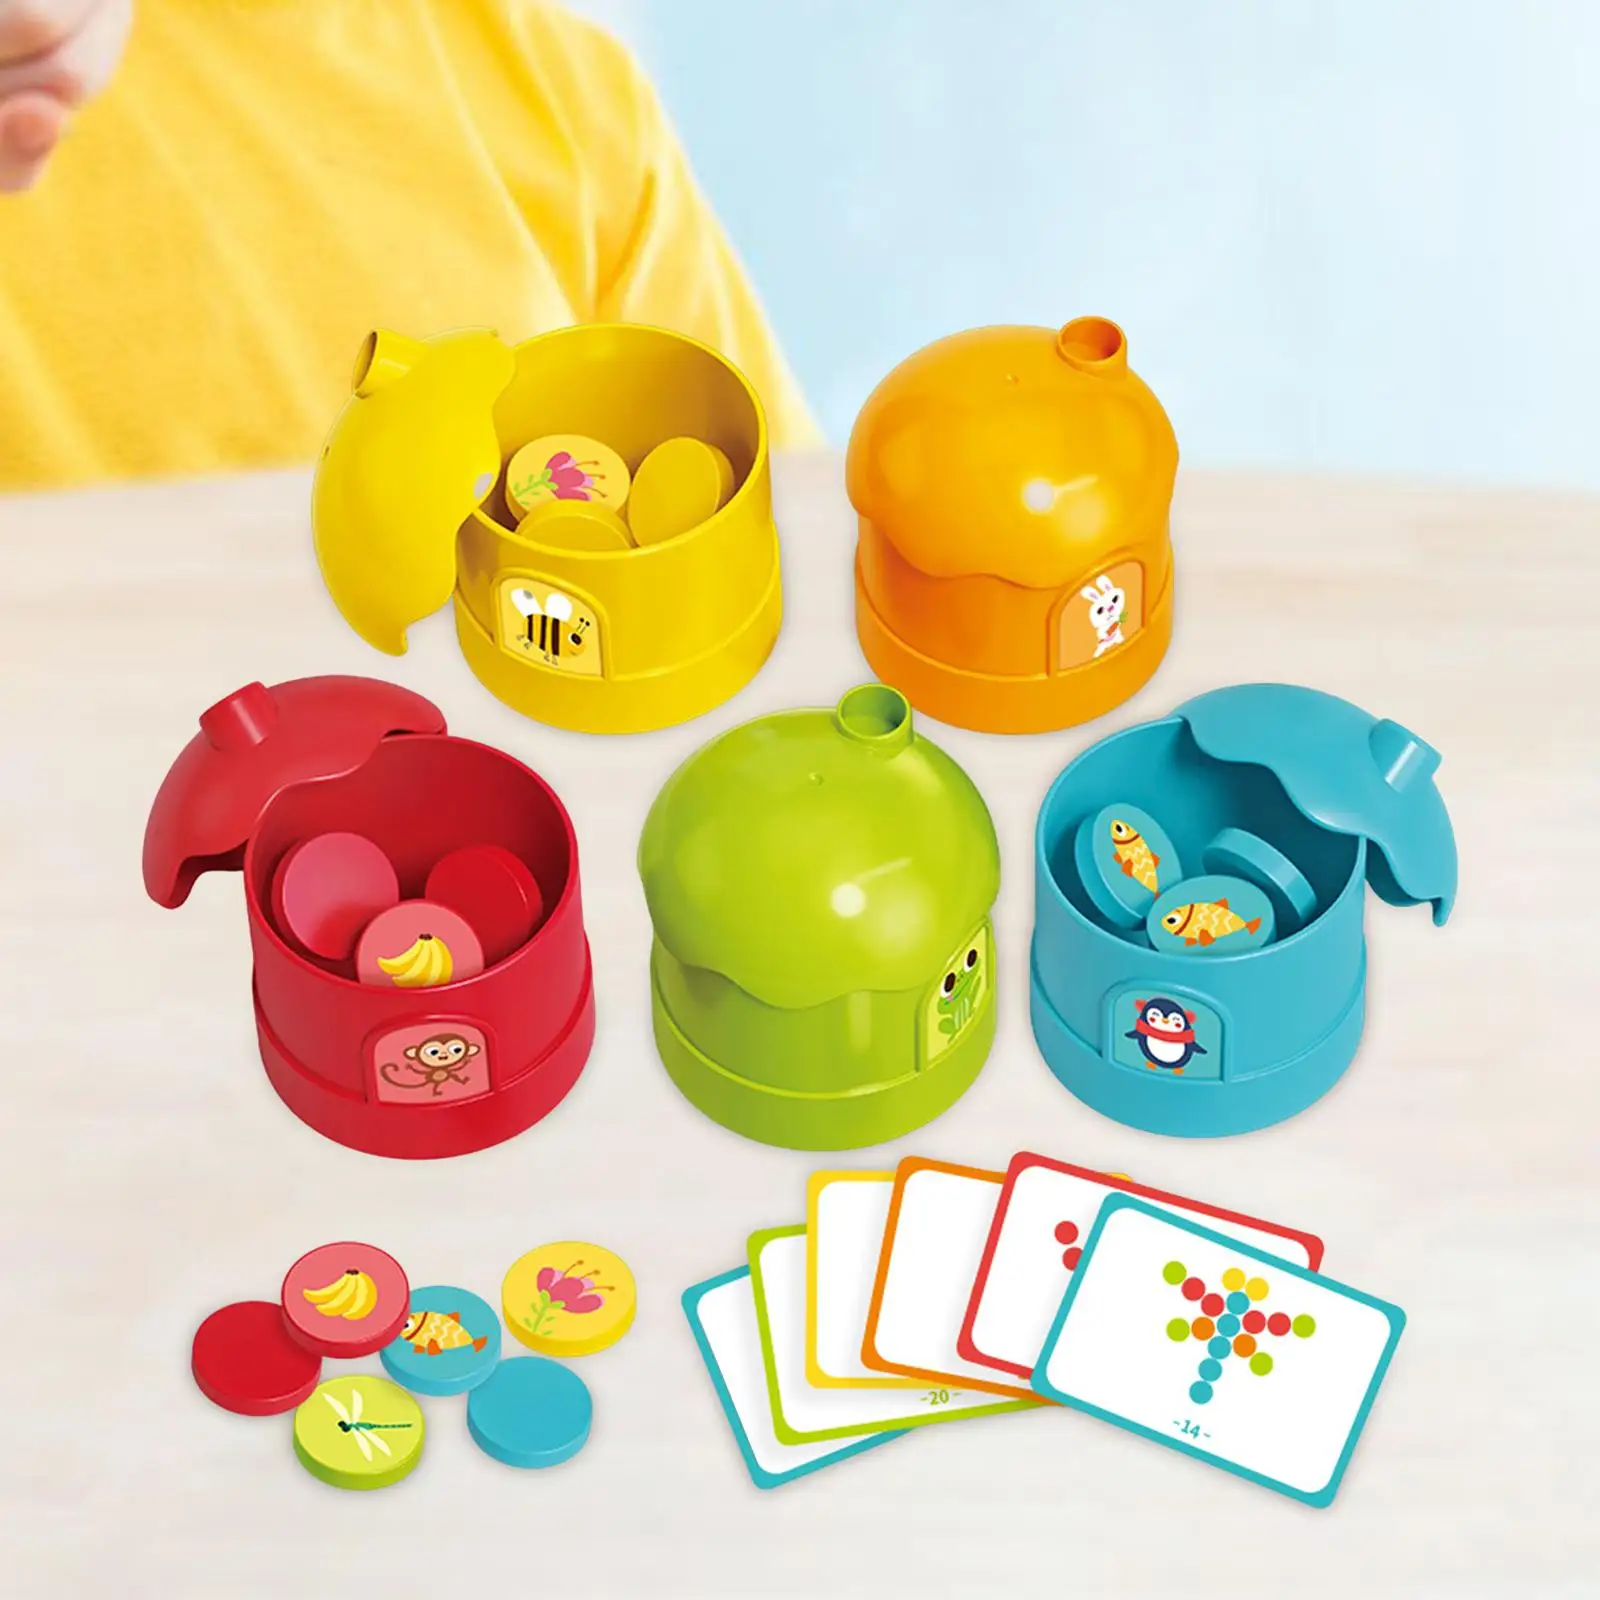 Sorting Cup Classified Toys Cognitive Multipurpose for Learning Activities